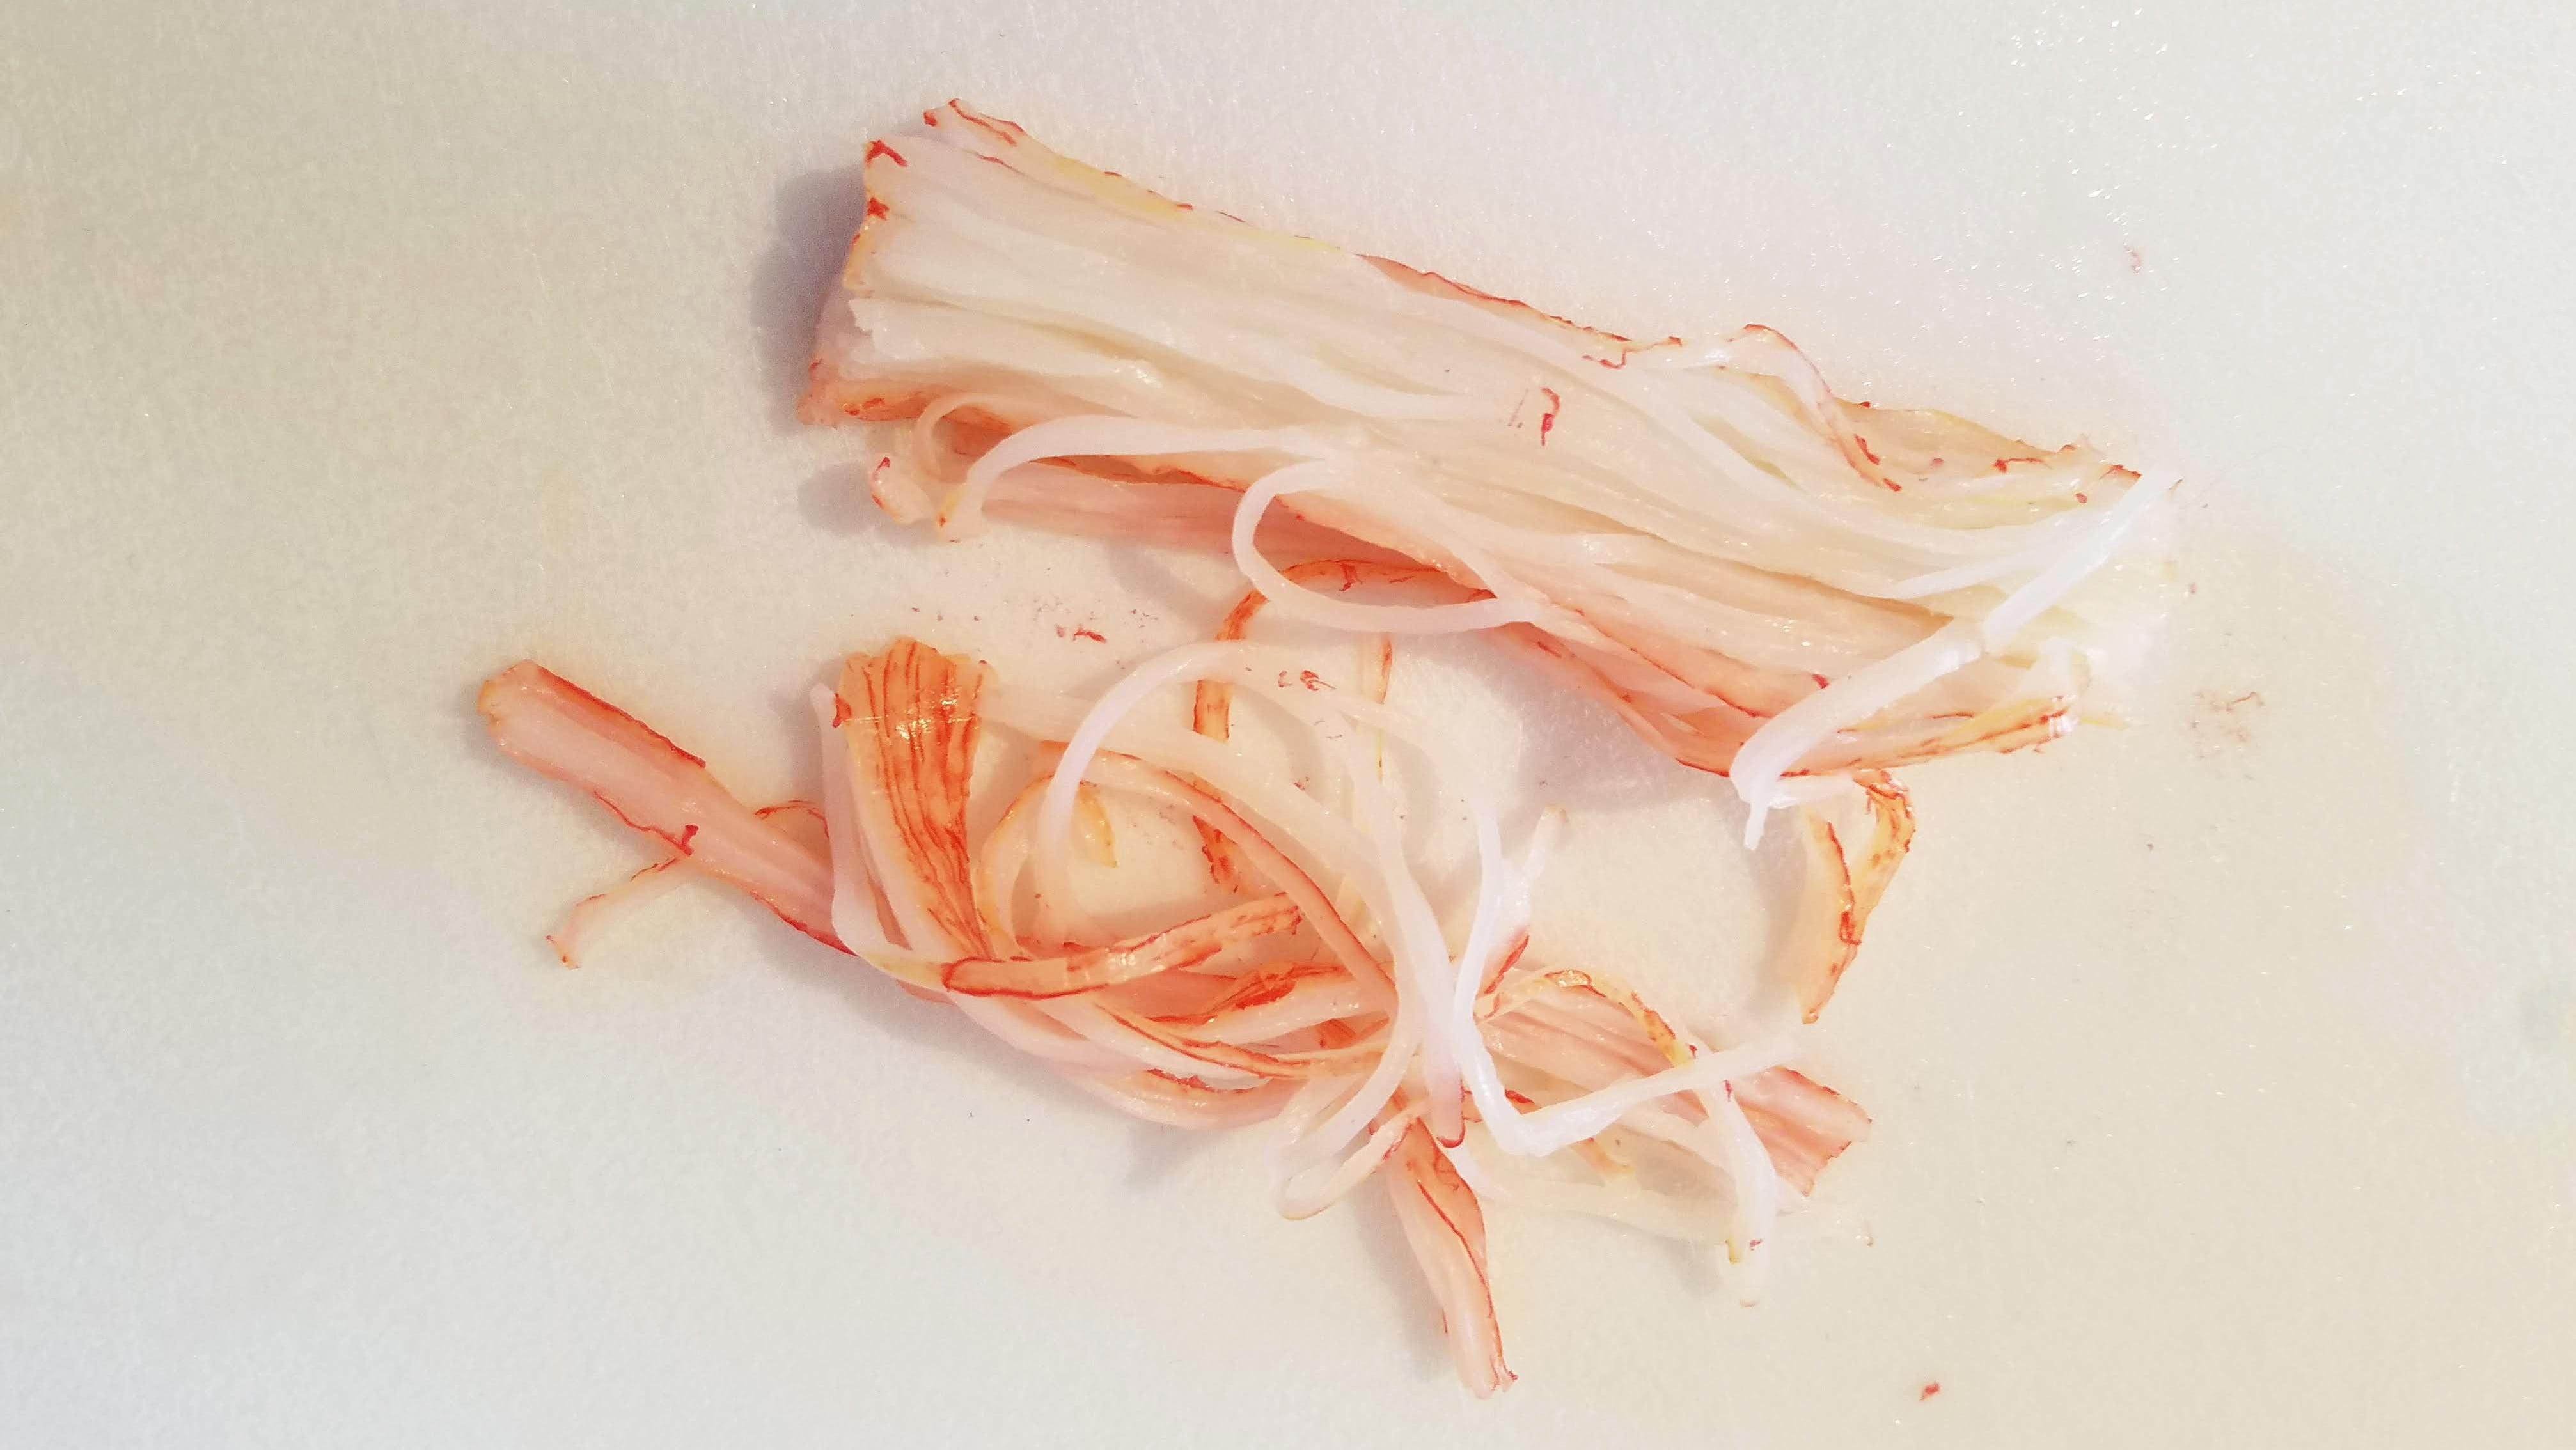 A shredded crab stick, with long strings pulled out